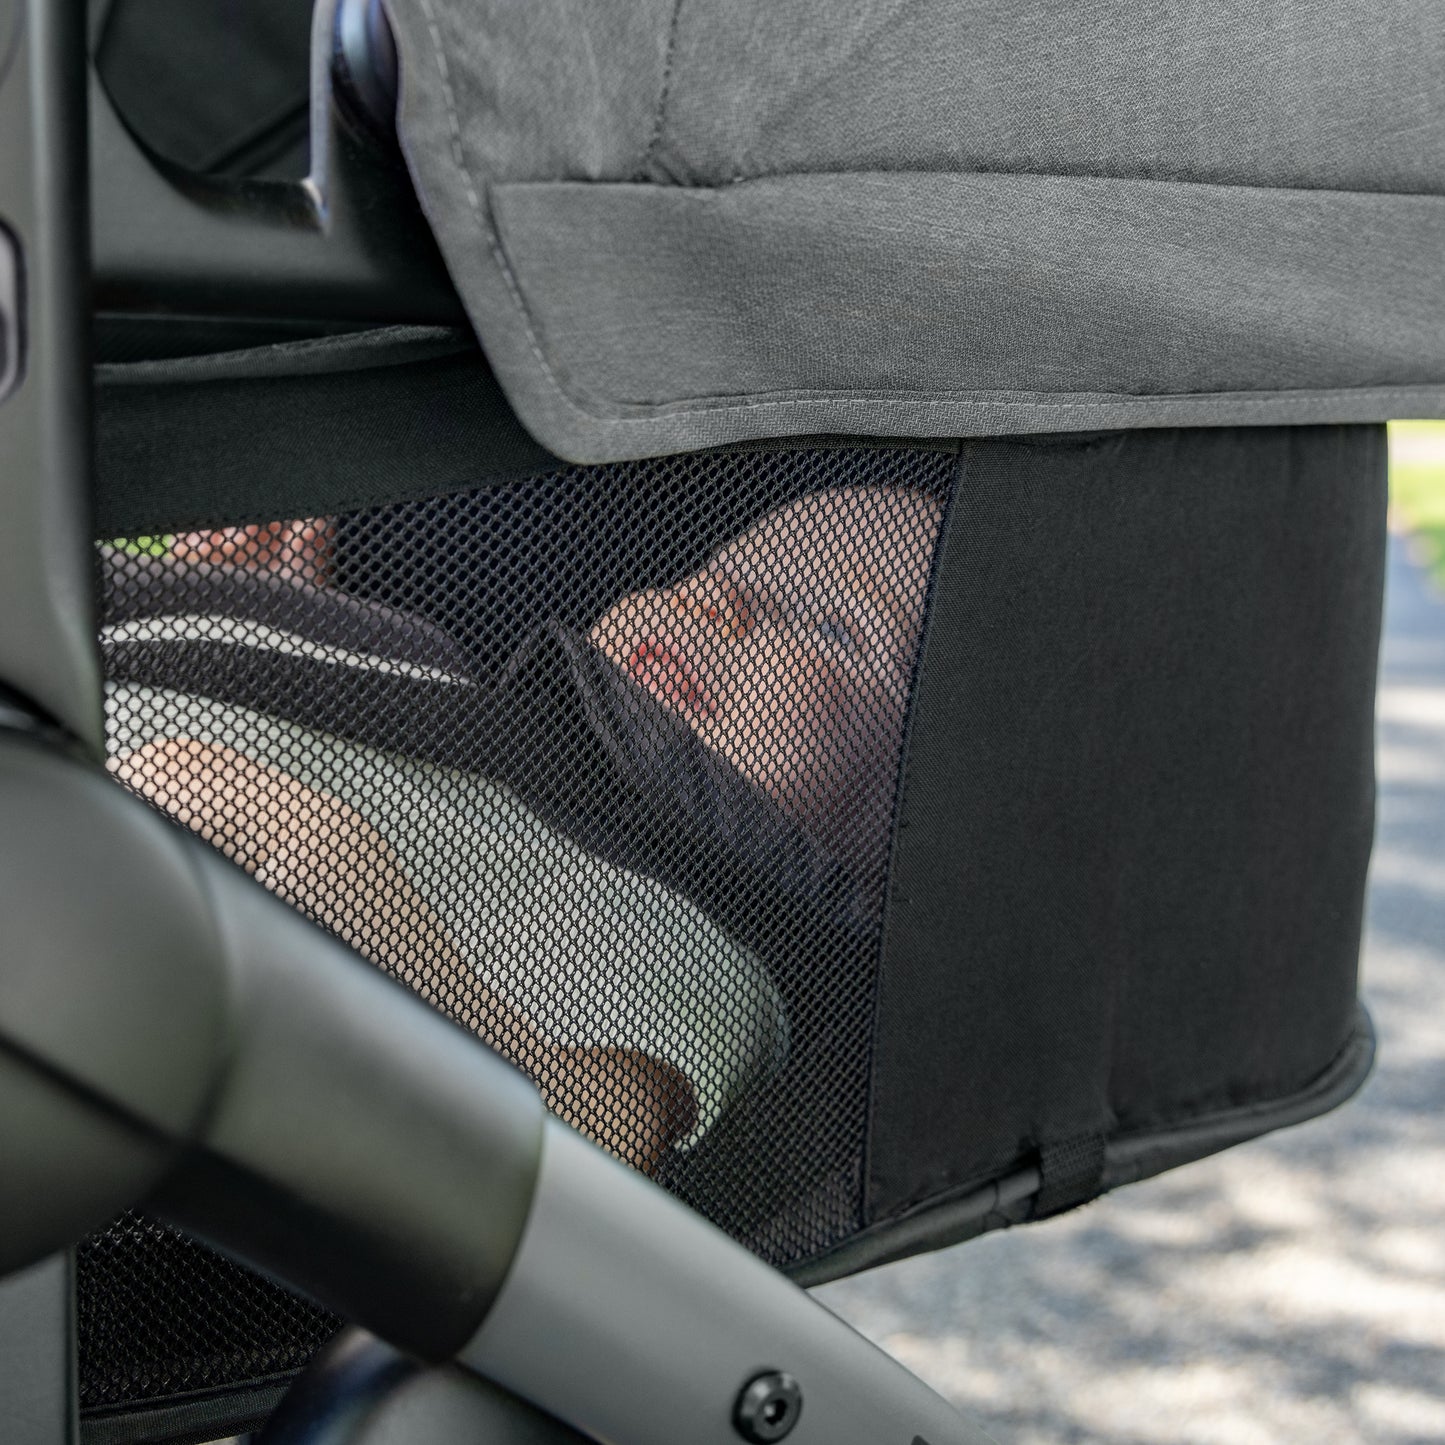 Pivot Suite Modular Travel System with LiteMax Infant Car Seat